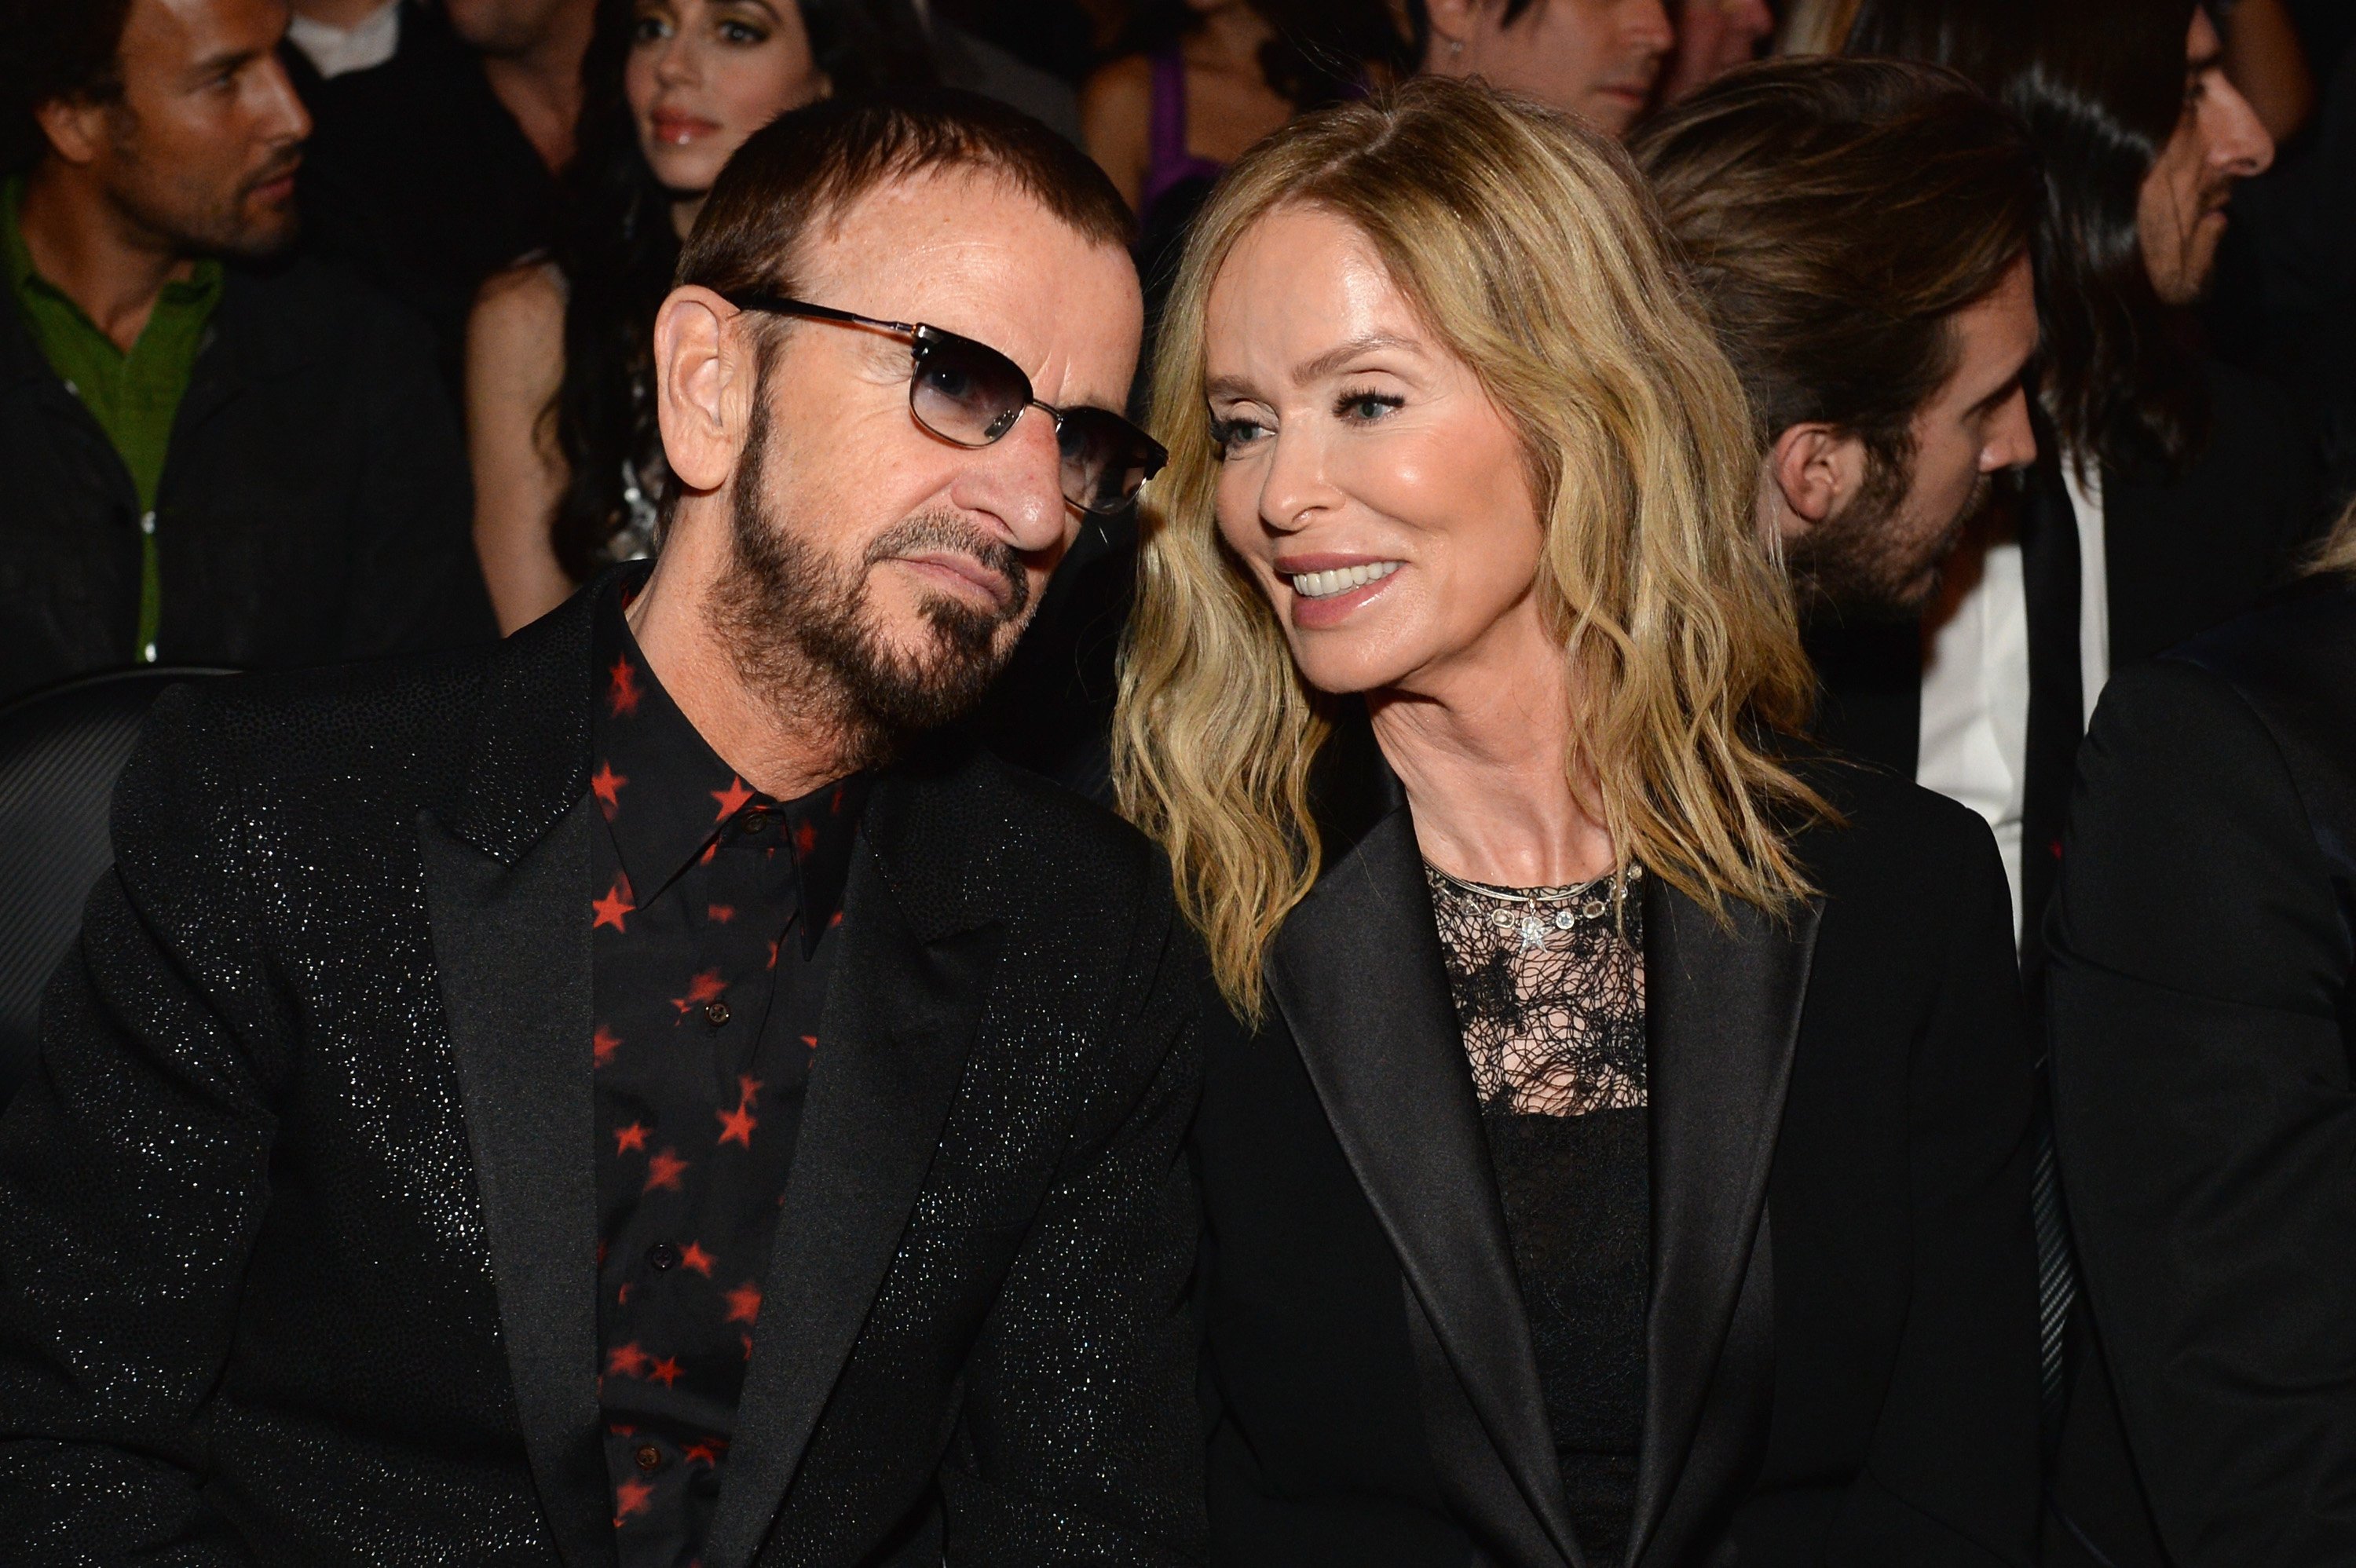 Ringo Starr and Barbara Bach at Staples Center on January 26, 2014, in Los Angeles, California. I Source: Getty Images